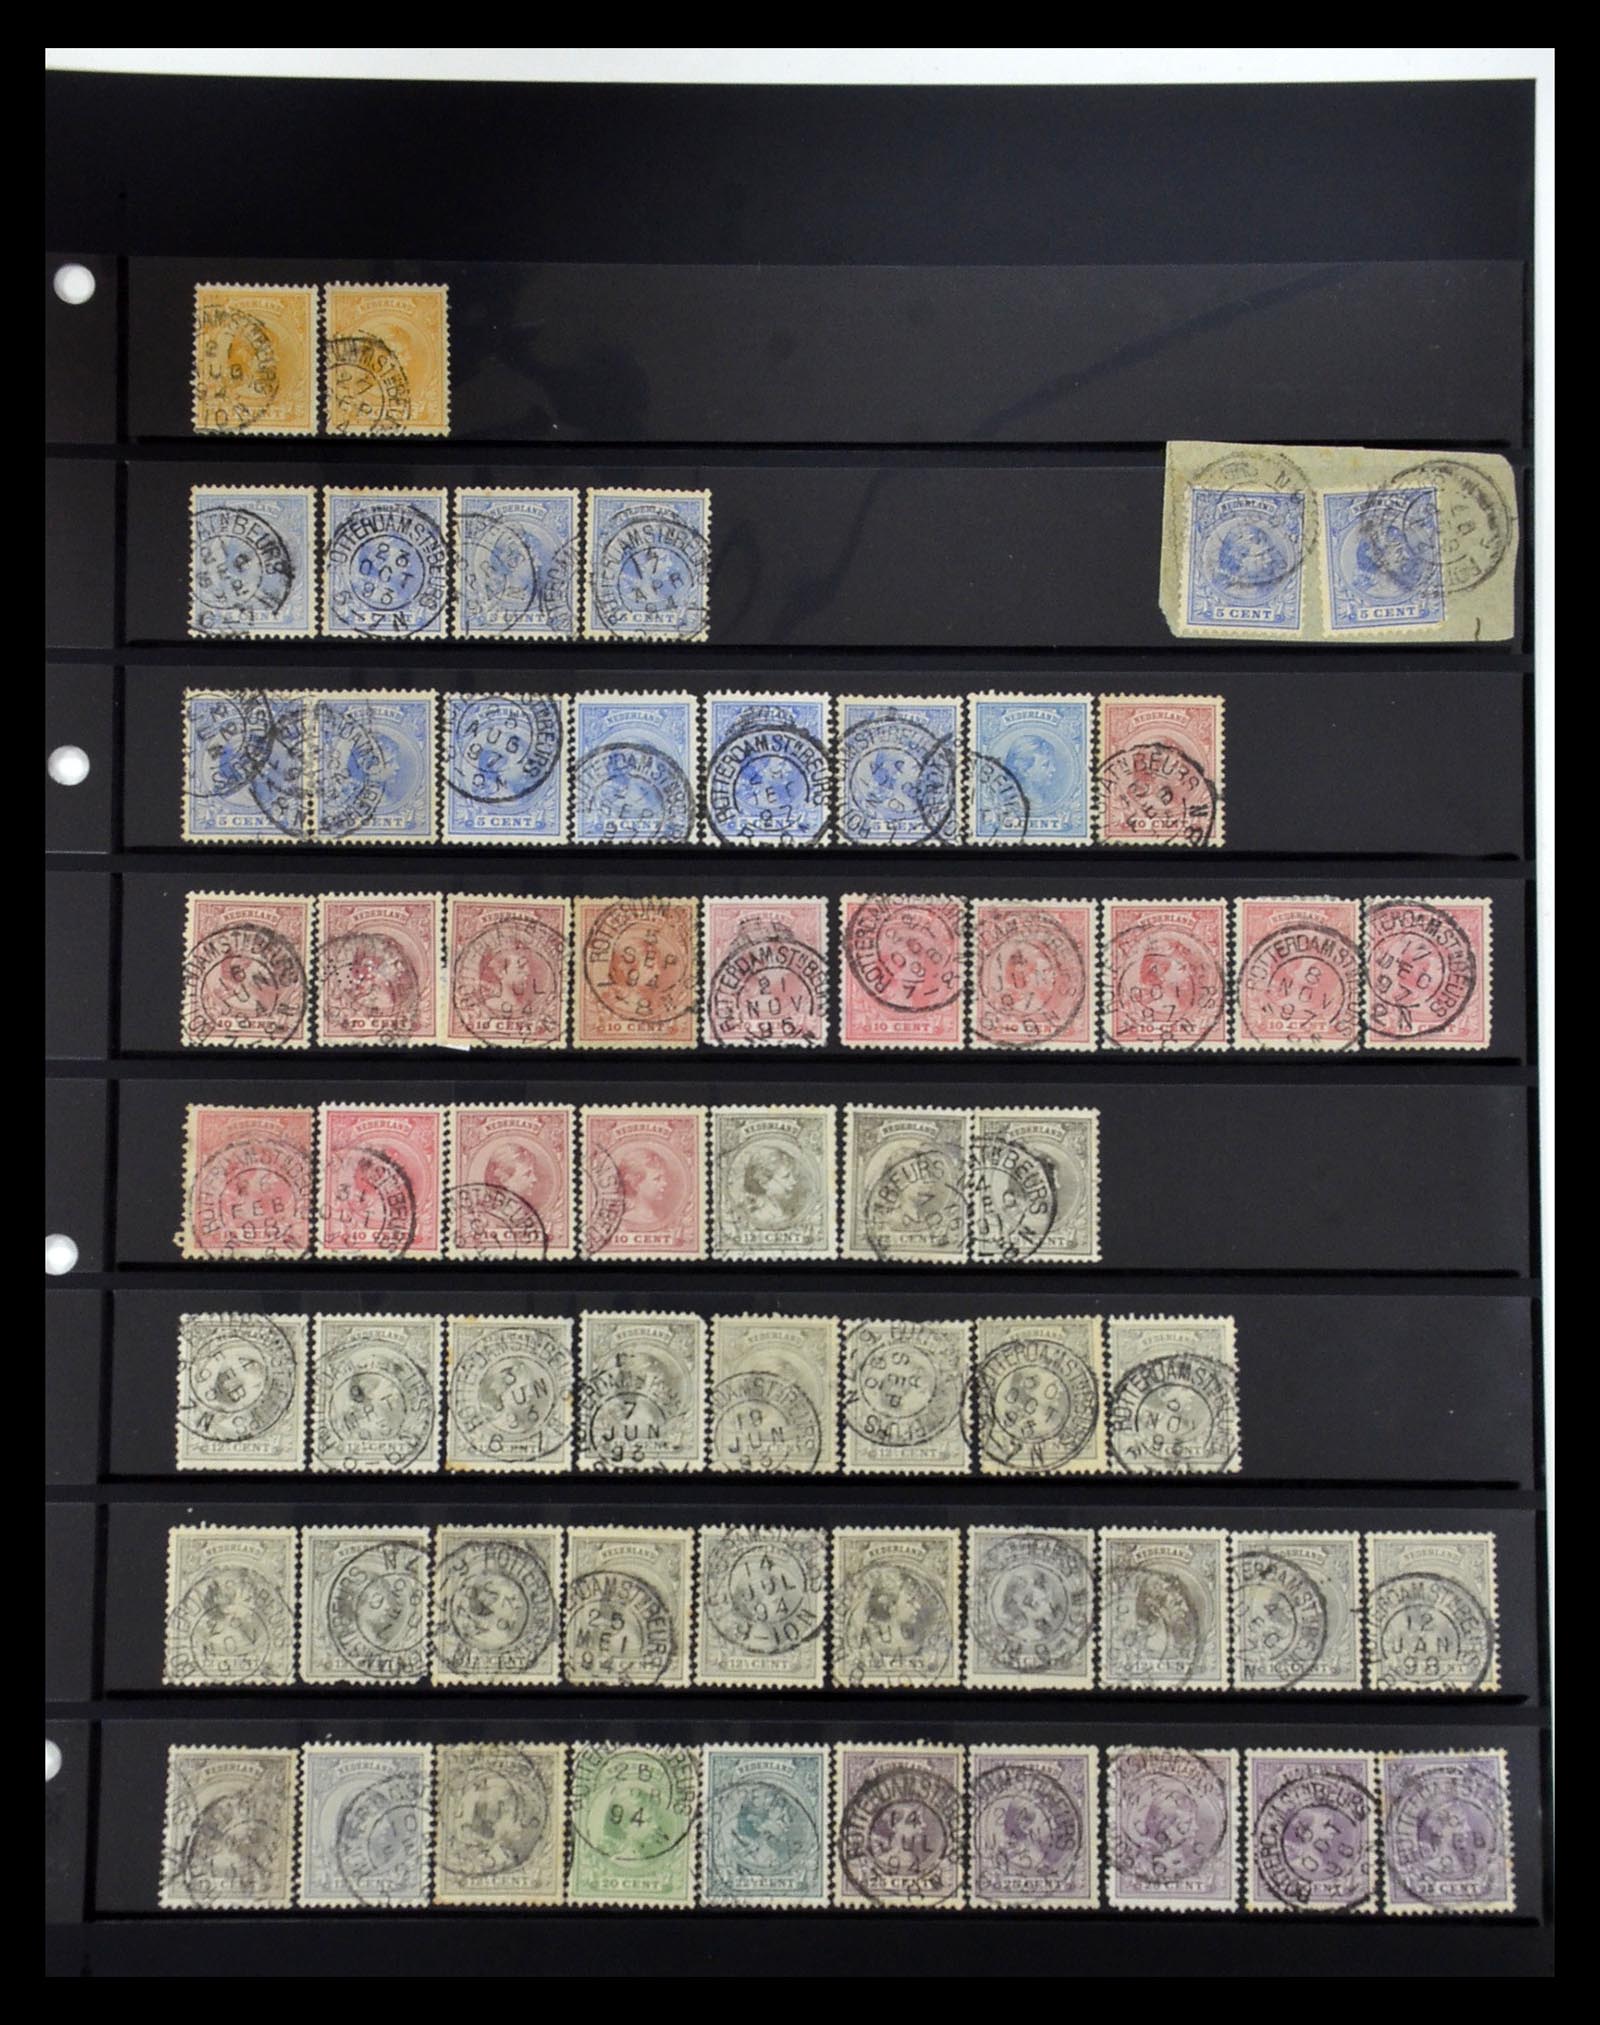 34889 017 - Stamp Collection 34889 Netherlands small round station cancels.